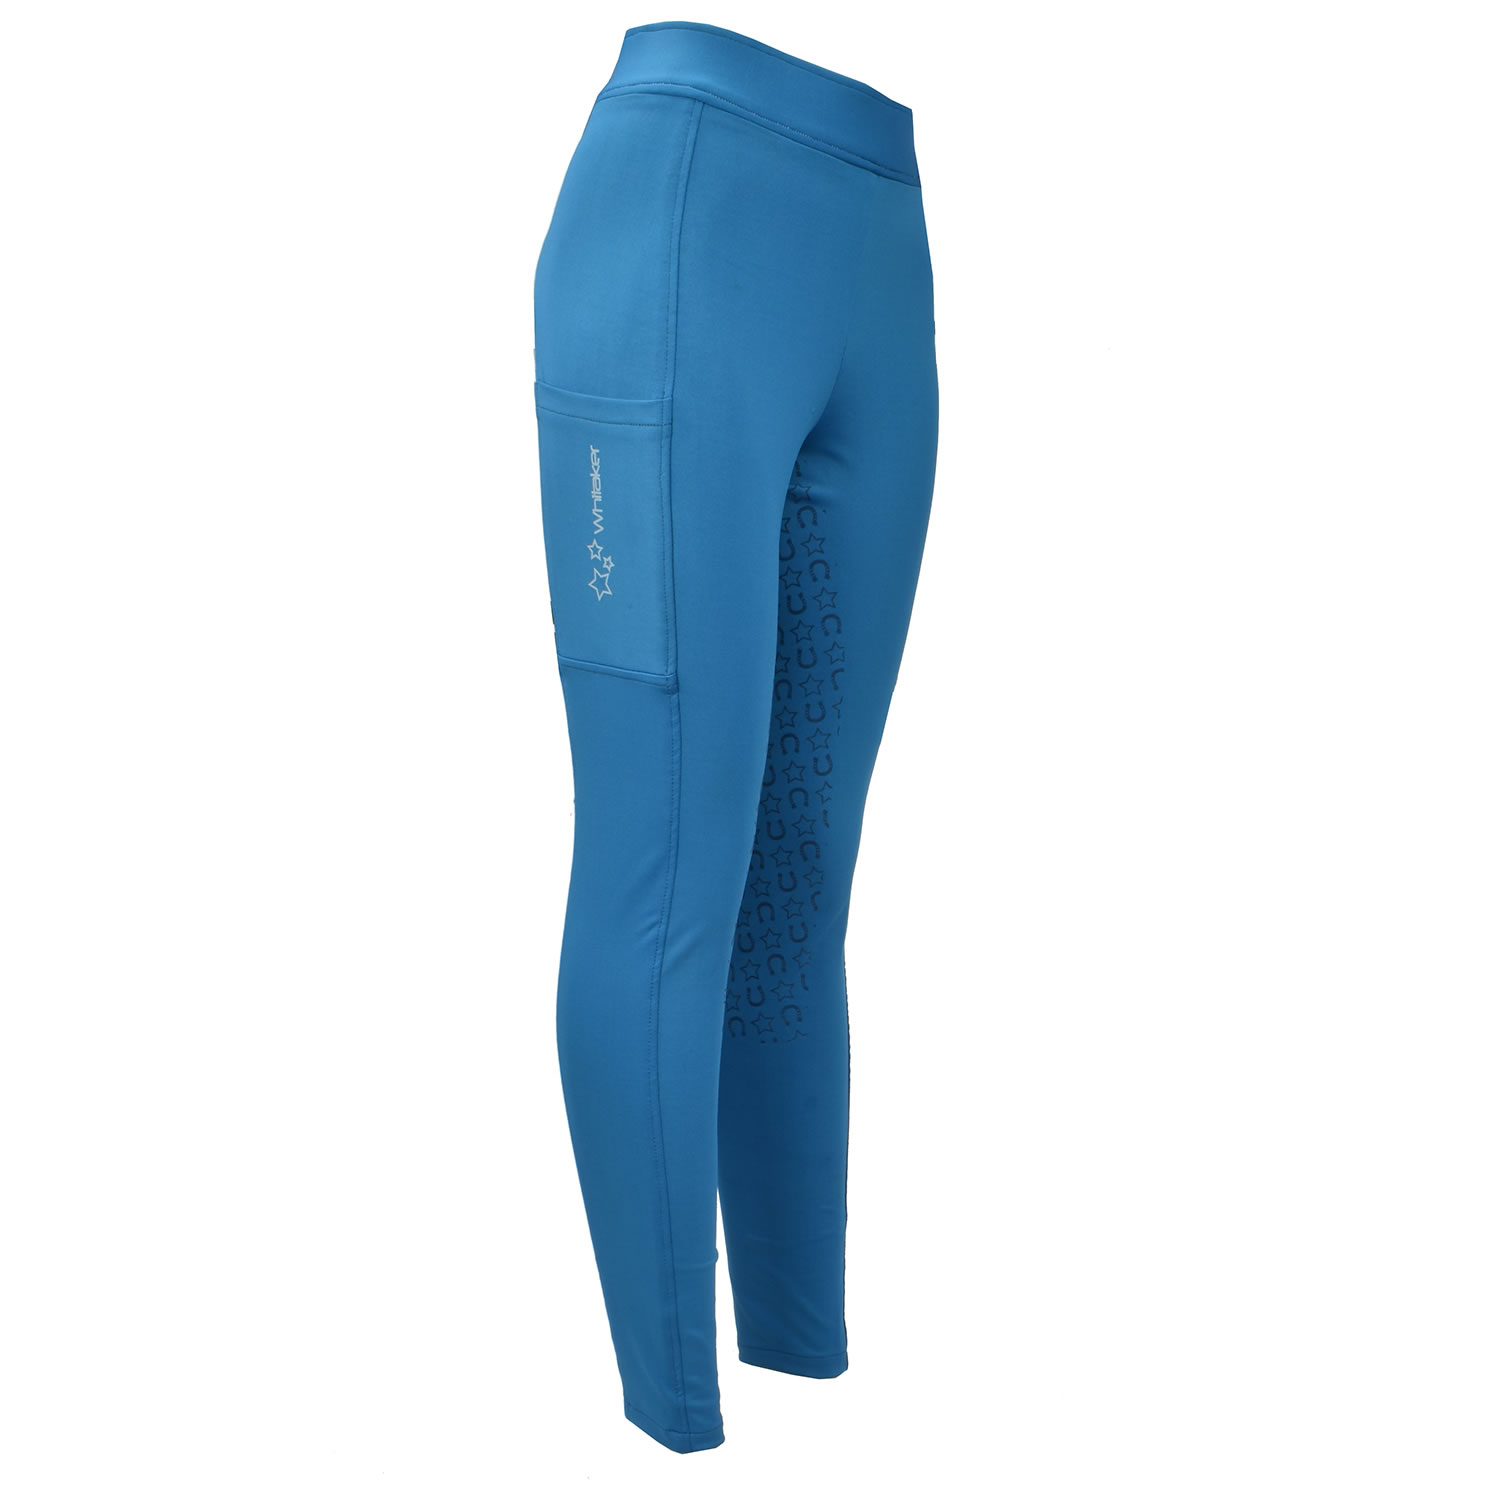 WHITAKER CLITHEROE RIDING TIGHTS CHILD BLUE  AGE 11 - 12 CHILD